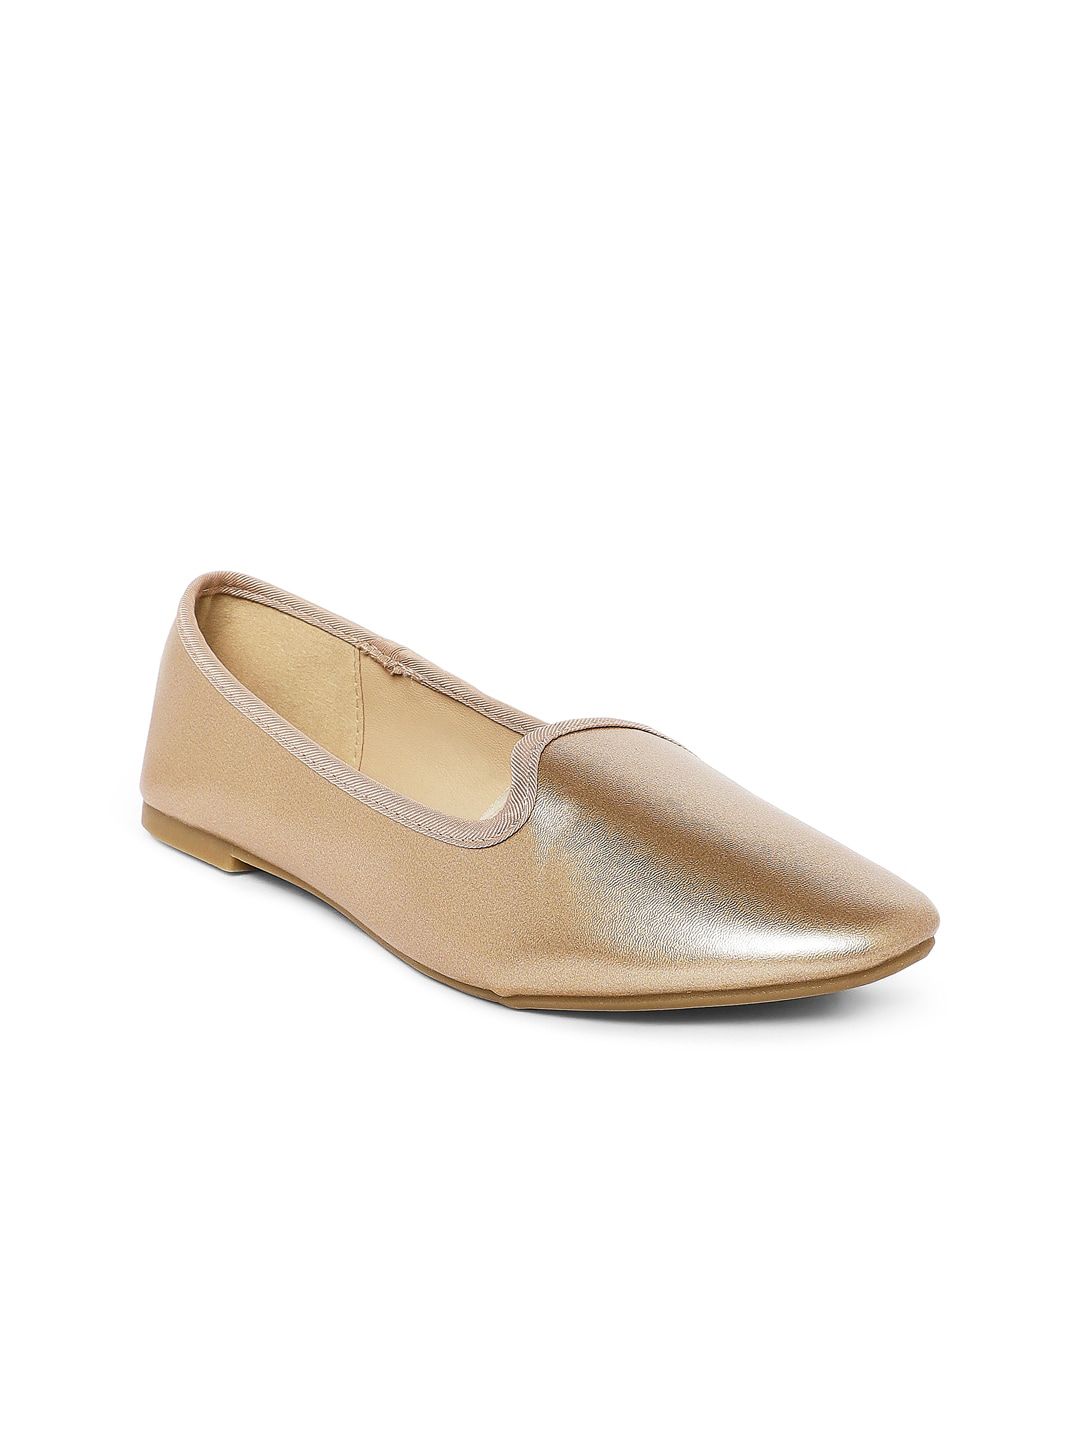 Forever Glam by Pantaloons Women Gold-Toned PU Slip-On Sneakers Price in India